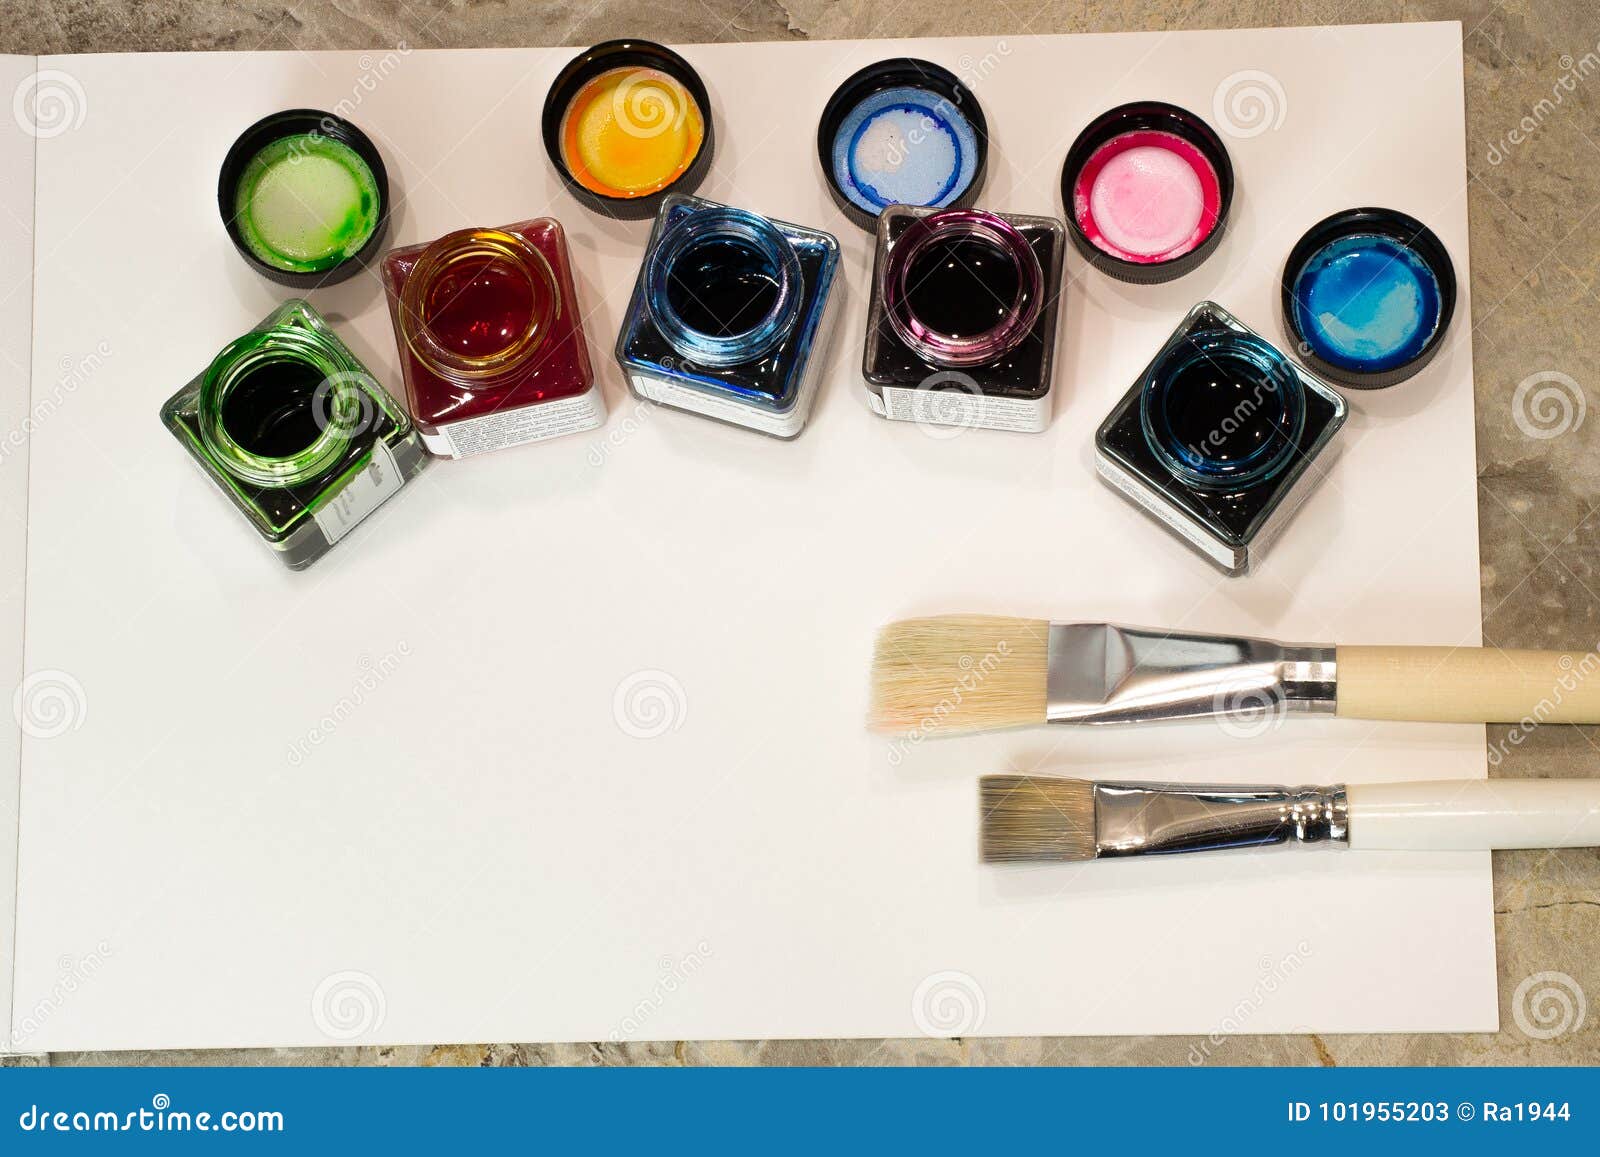 Paint Brushes, Acrylic Paint on a White Paper for Drawing Stock Image ...